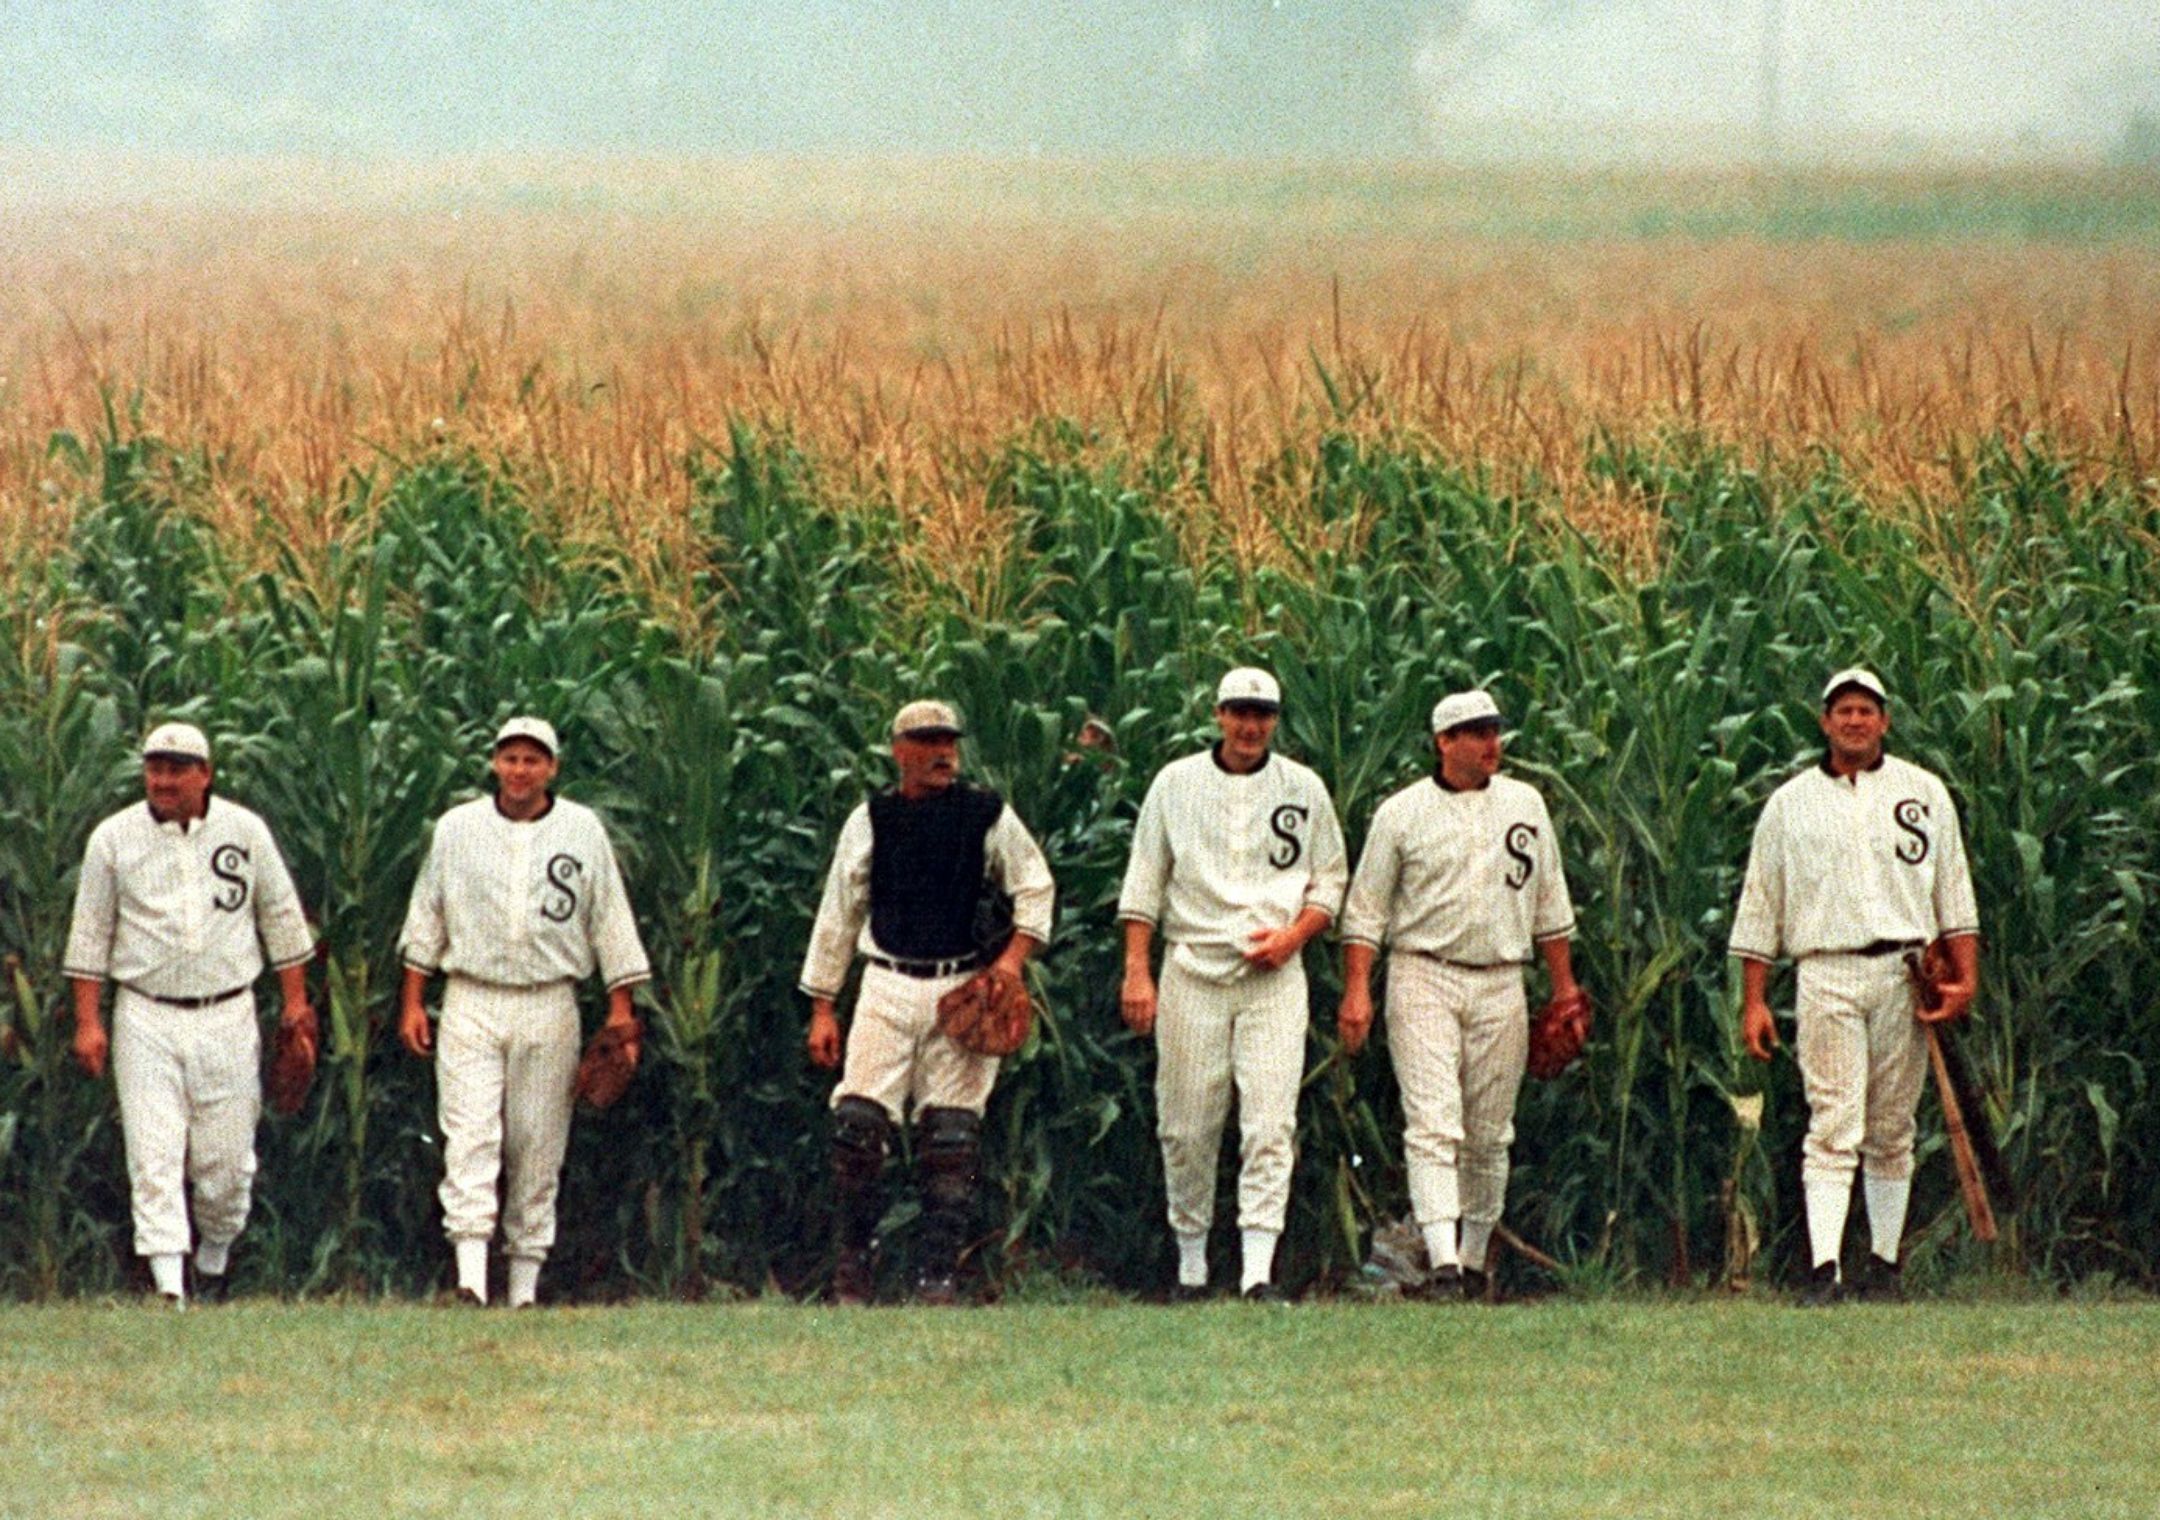 Field Of Dreams Film Review